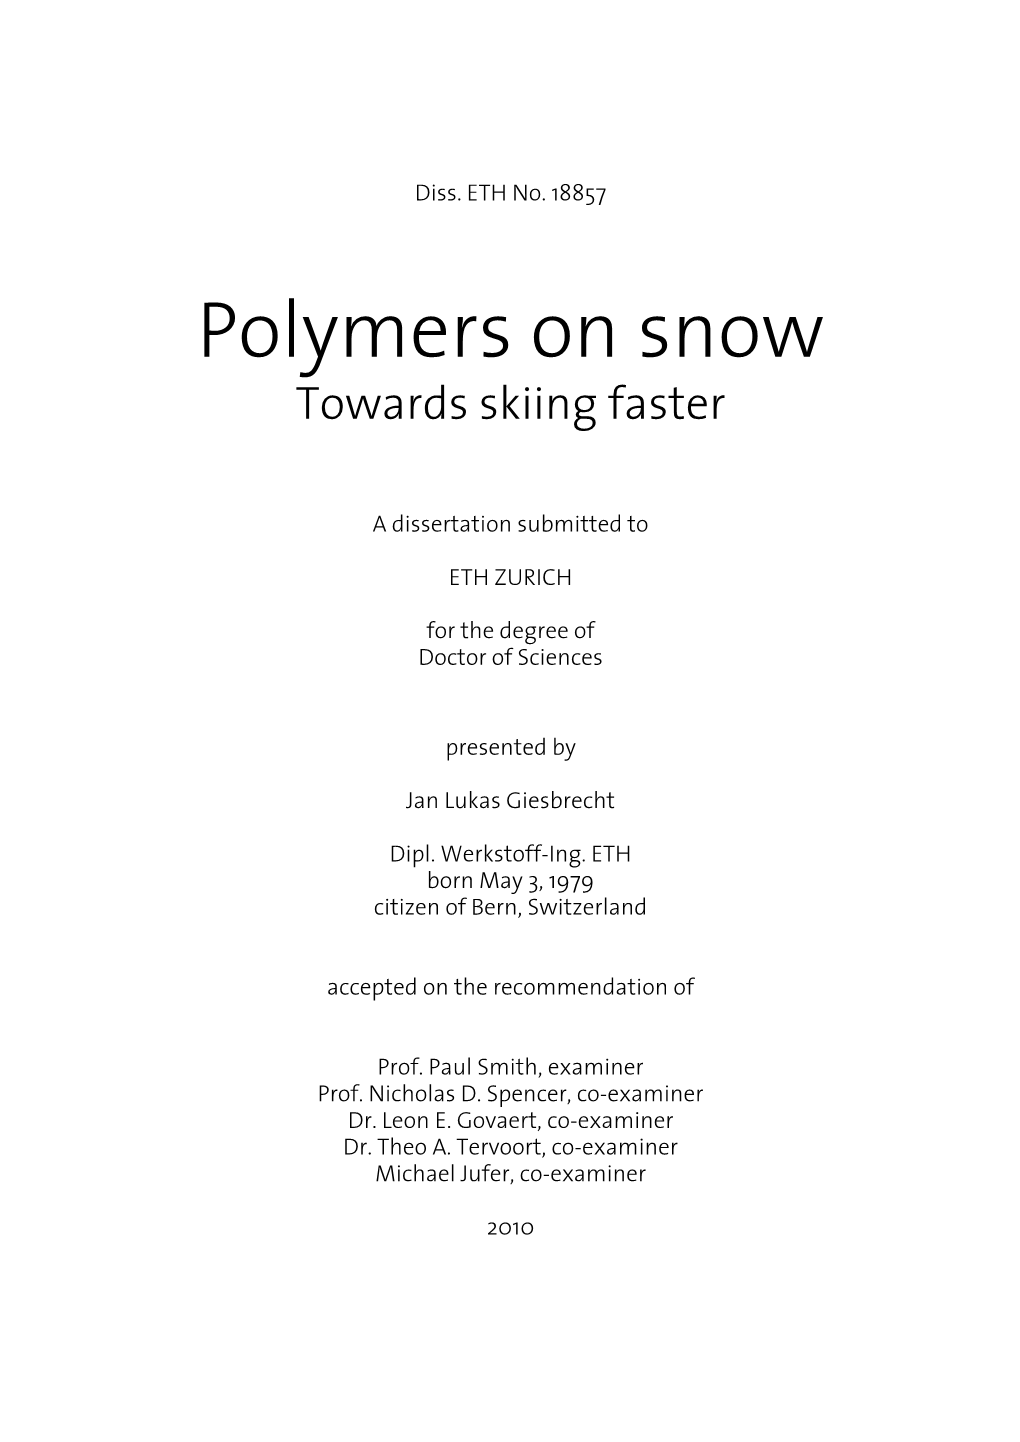 Polymers on Snow Towards Skiing Faster